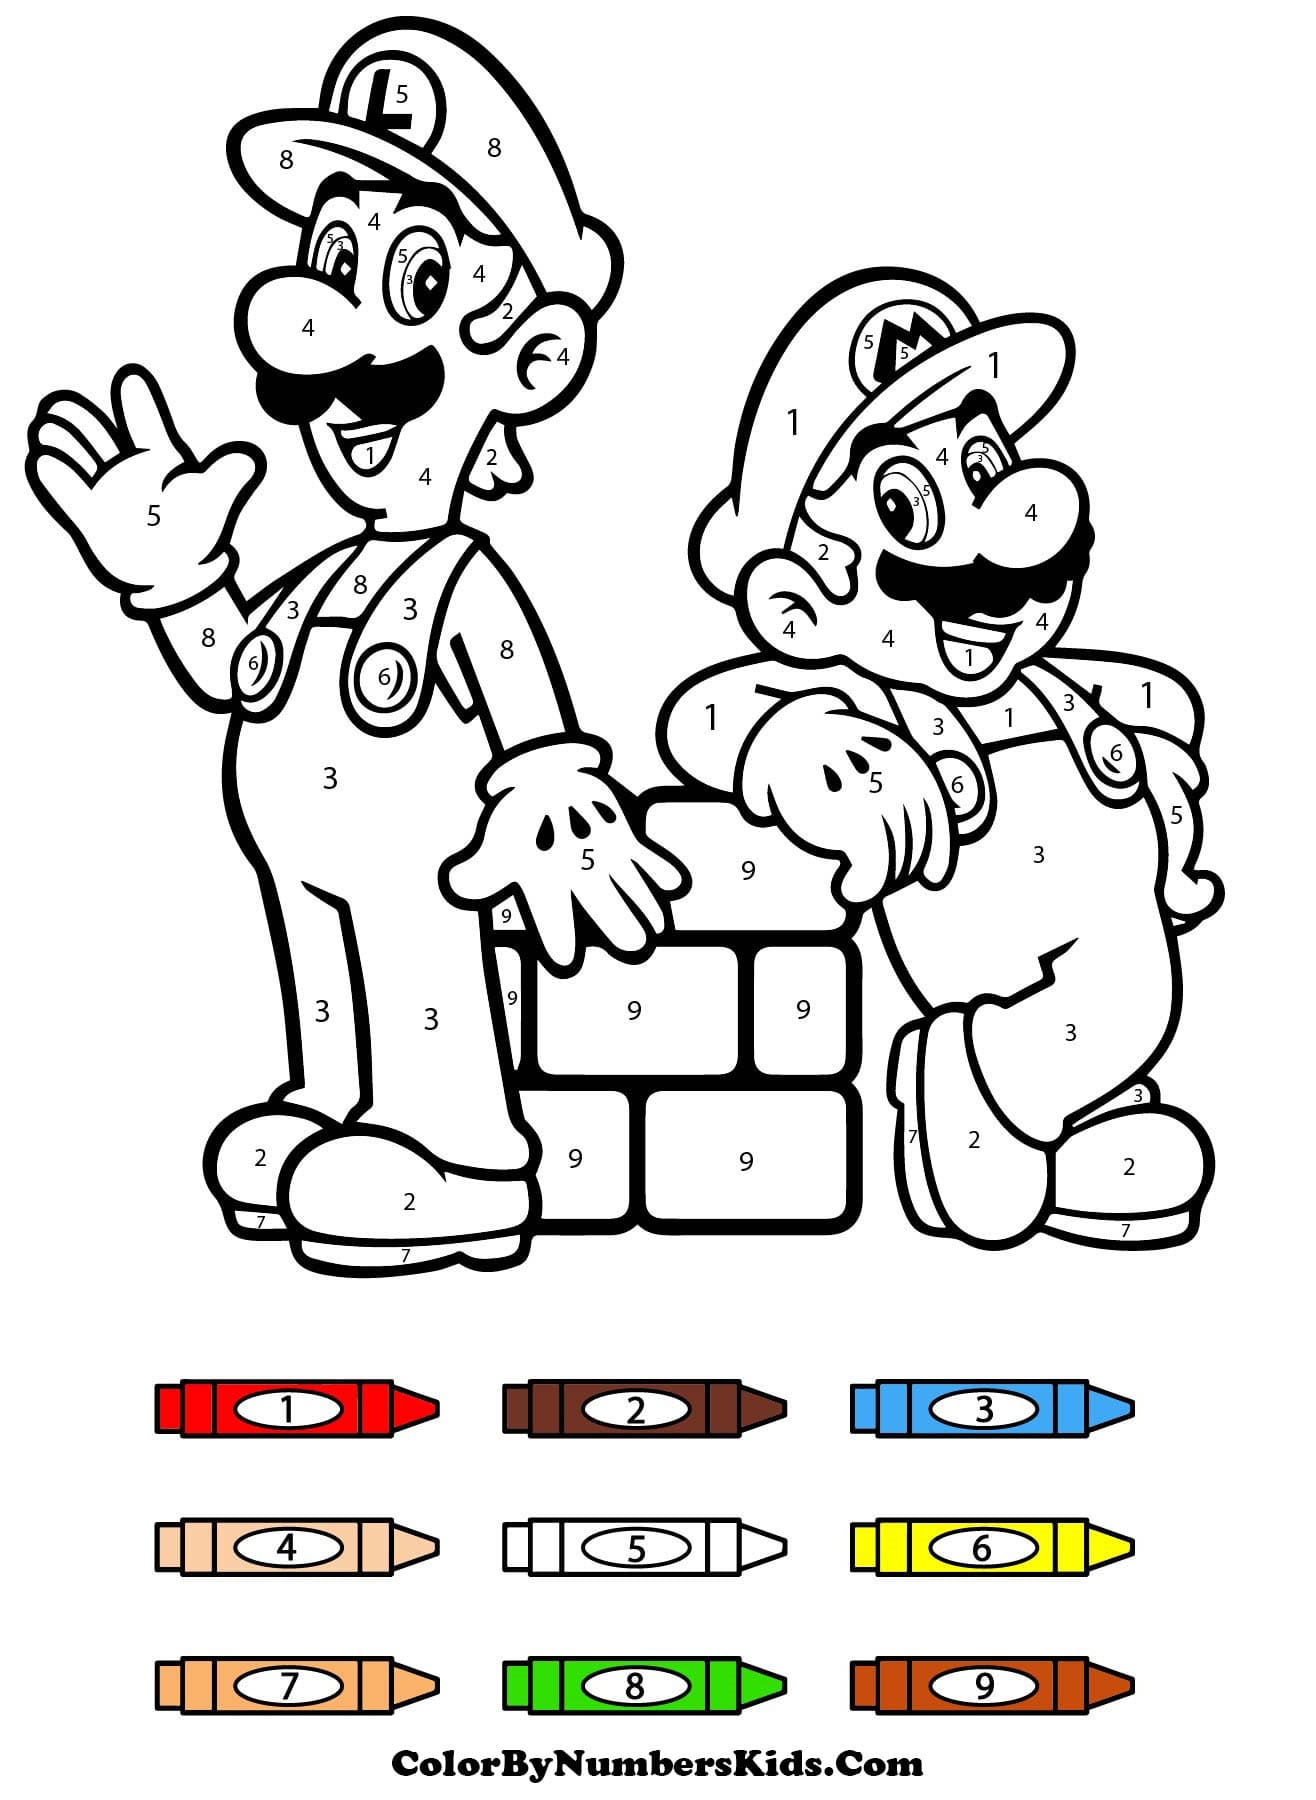 Mario Color By Number